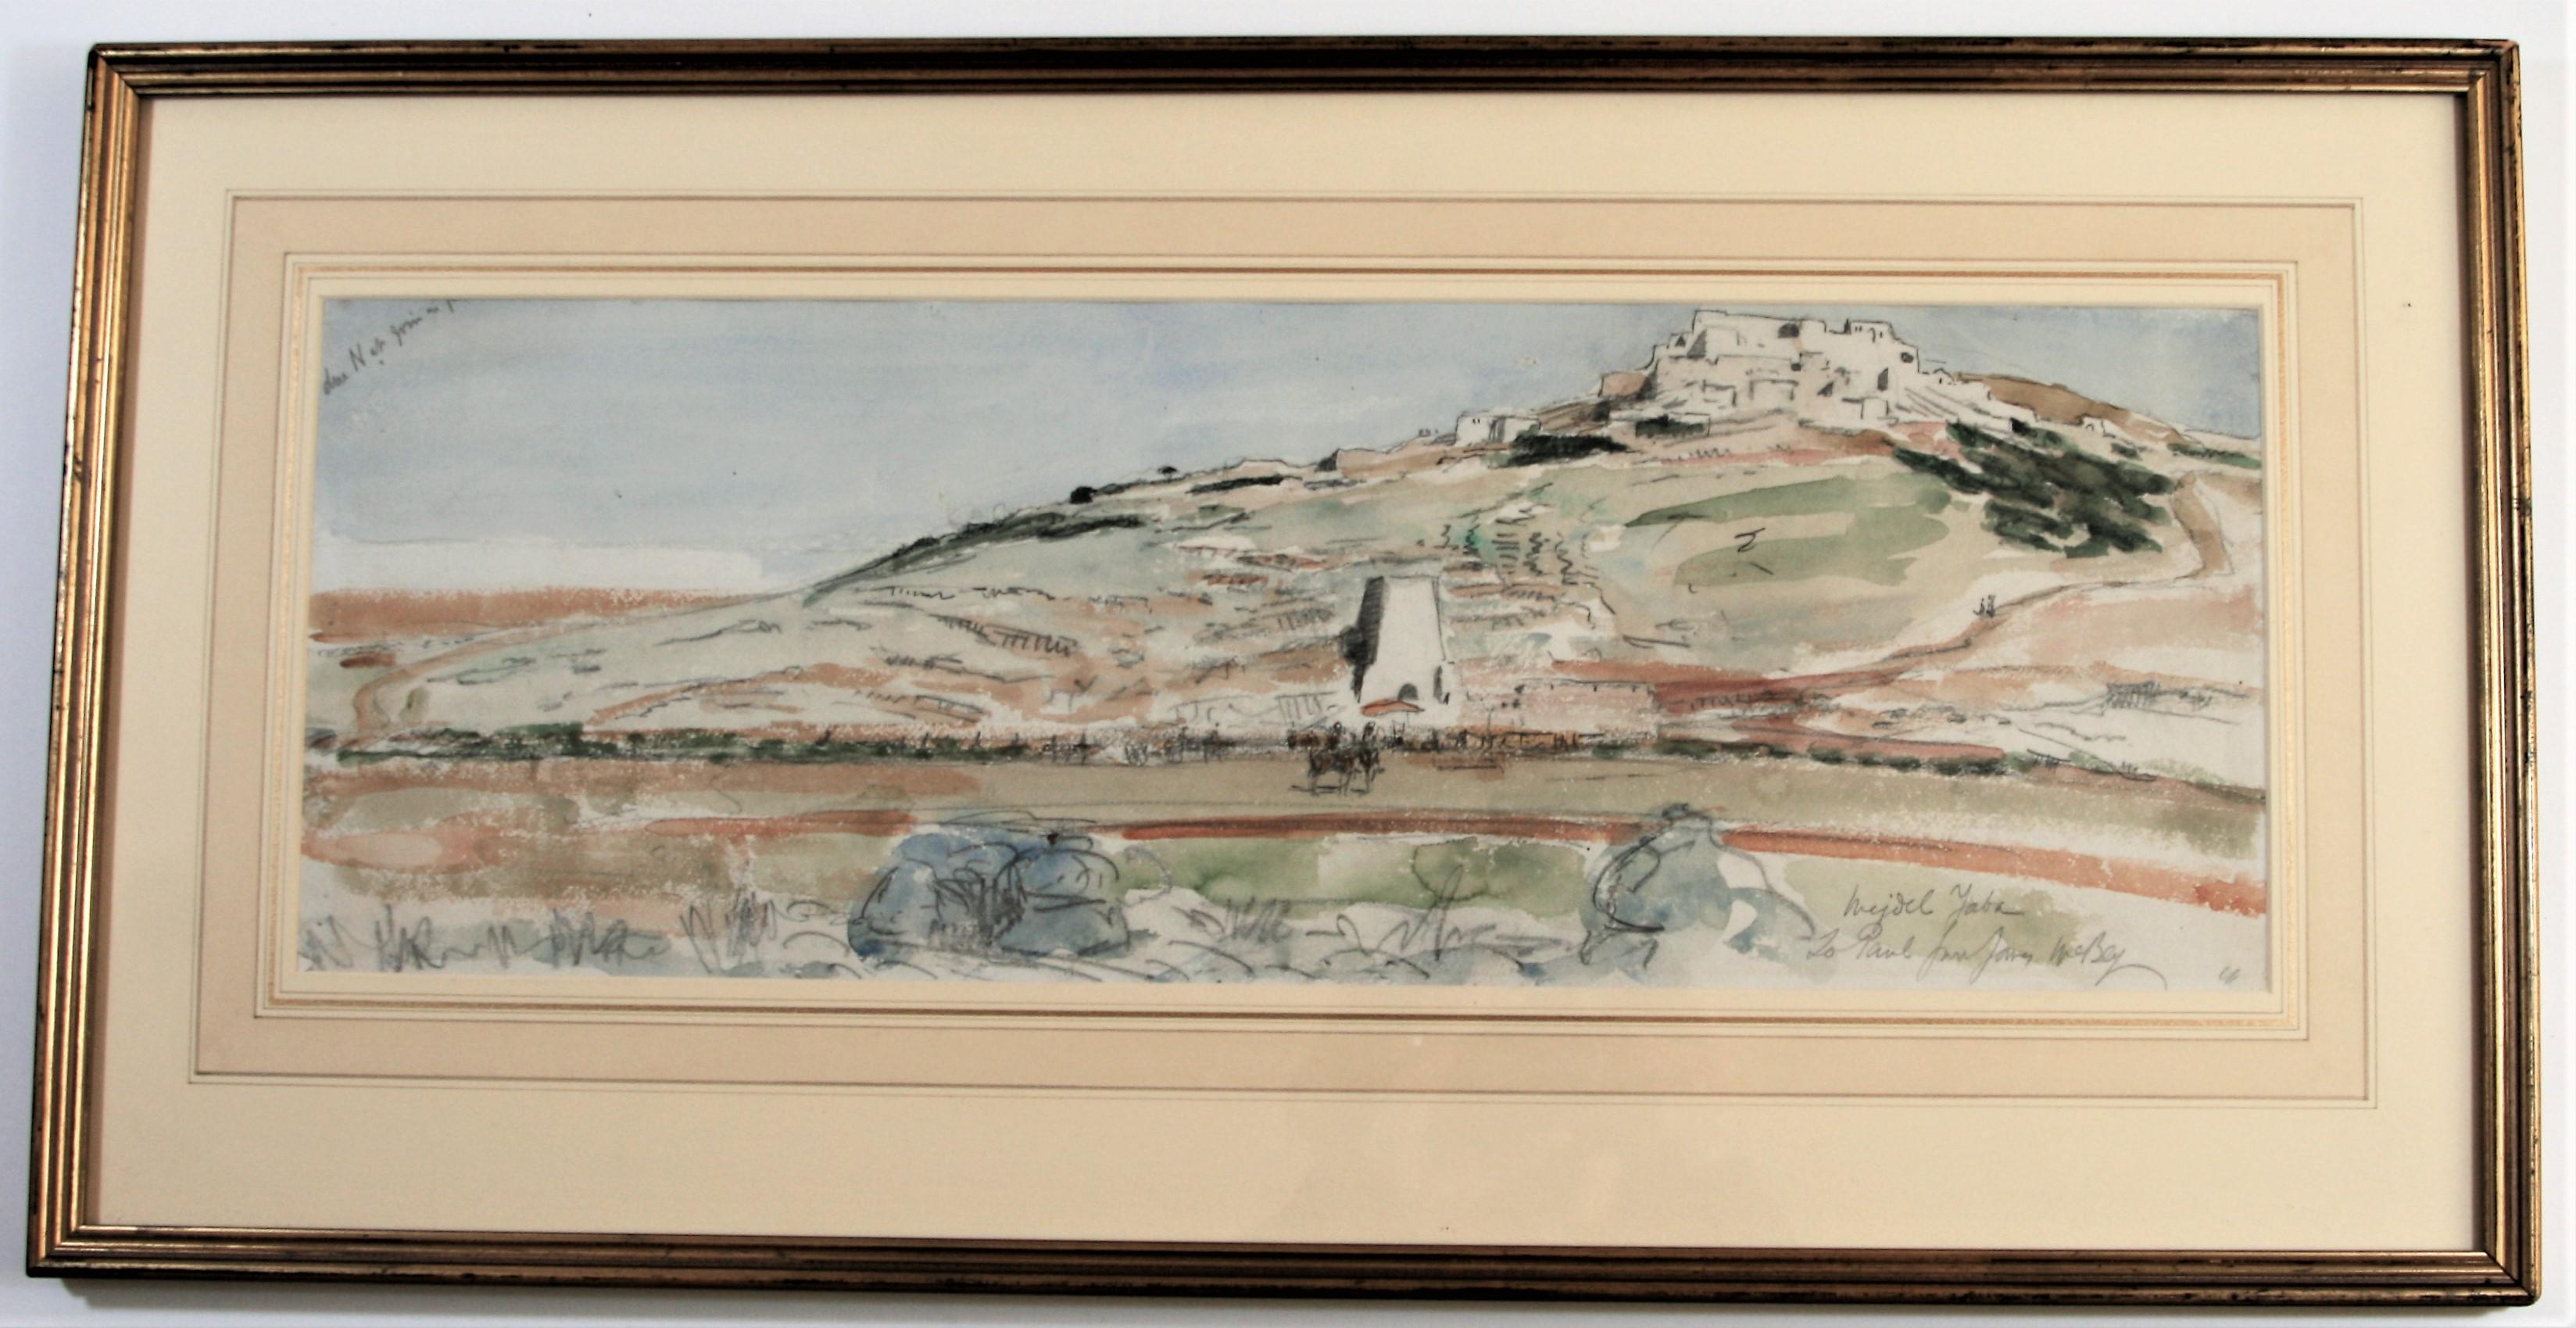 Mejdel Yaba. 20 September, 1918 Pencil, ink and watercolour on paper. 8 1/8 x 22. Provenance: The Fine Art Society. Annotated, upper left, 